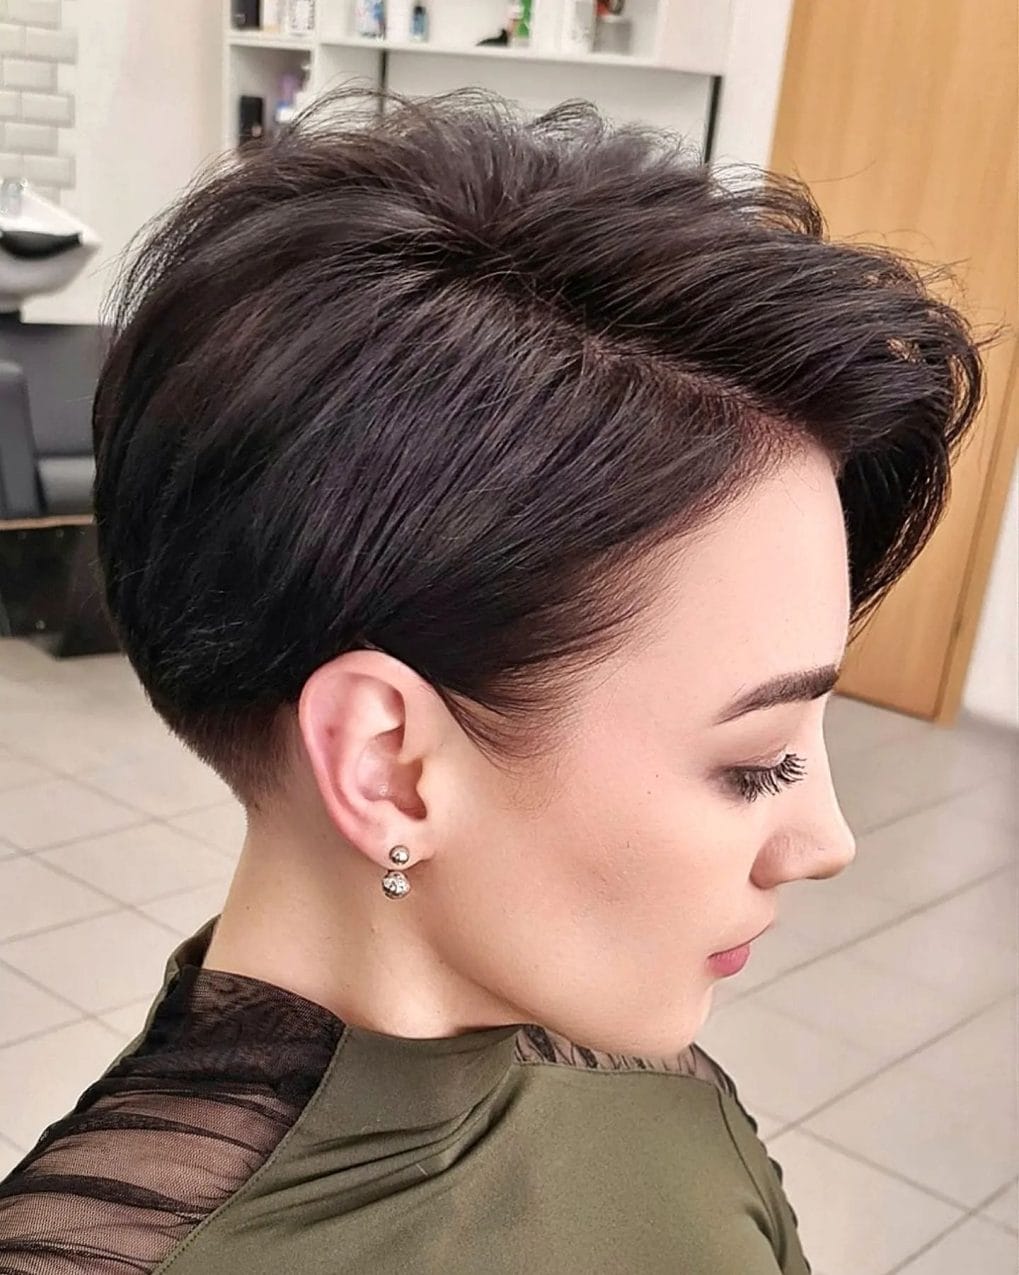 Classic pixie bob styled up and away from the face to highlight cheekbones with volume on top